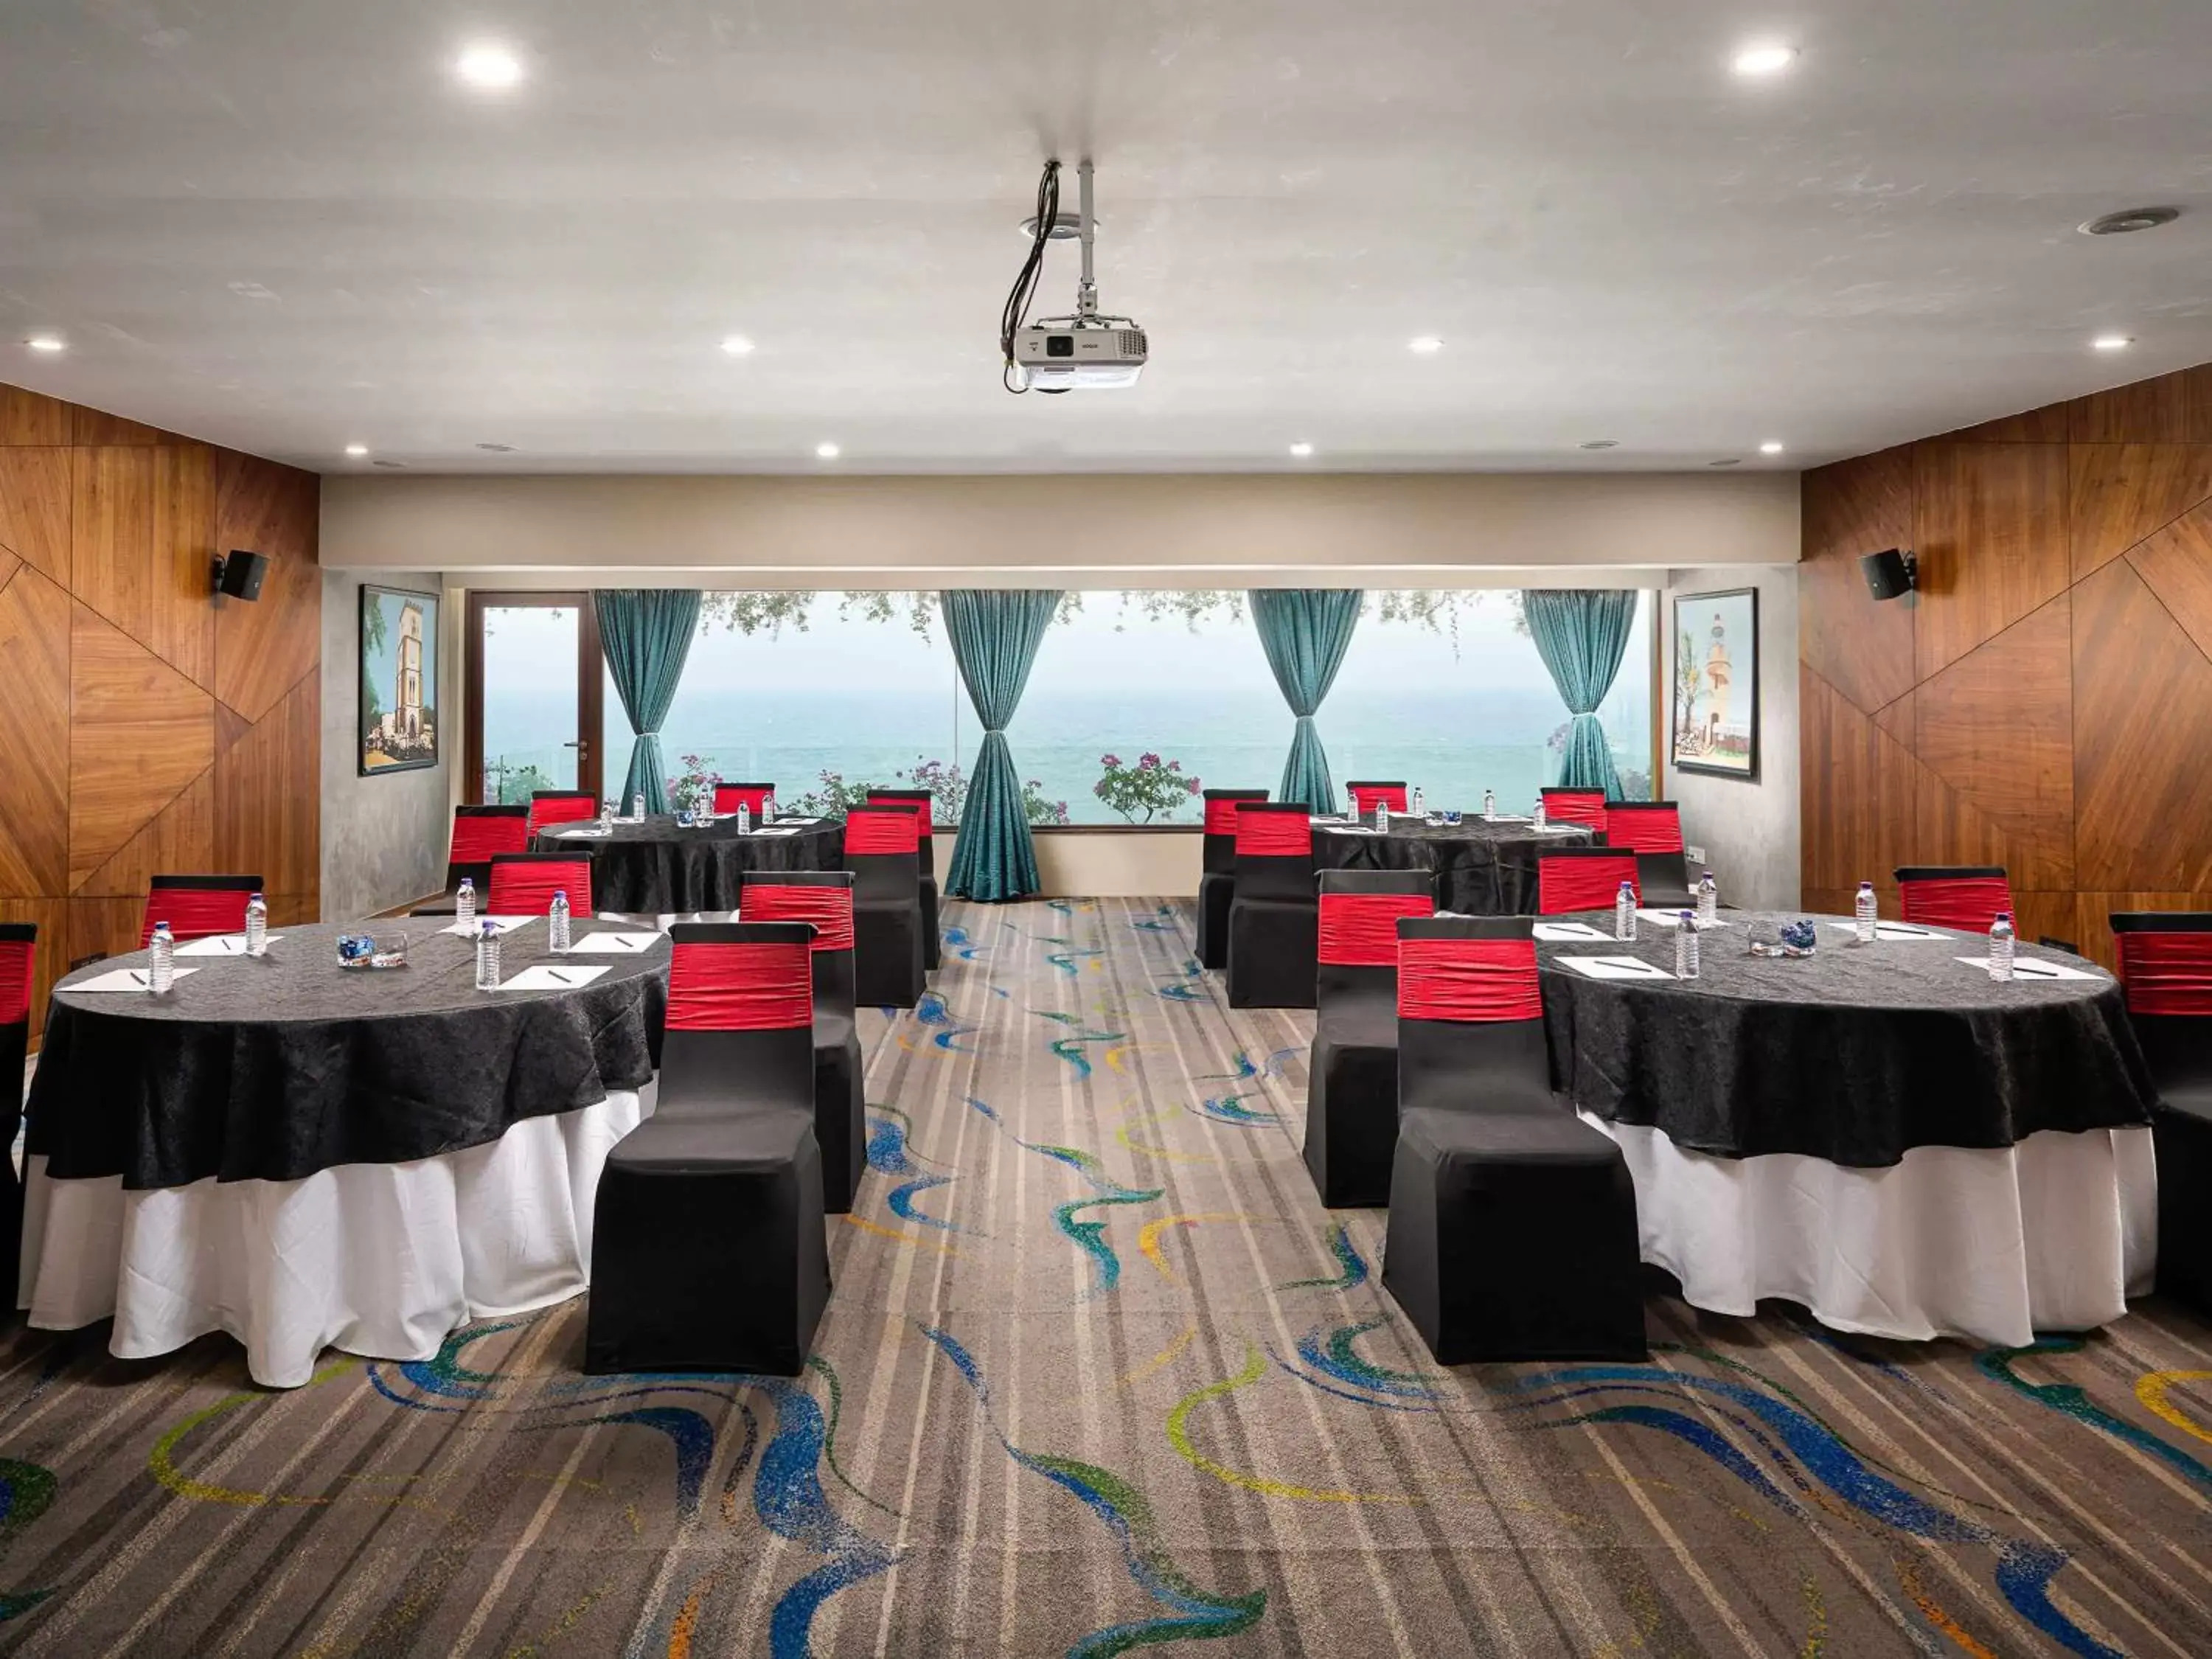 Meeting/conference room, Banquet Facilities in The Bheemli Resort Visakhapatnam by AccorHotels